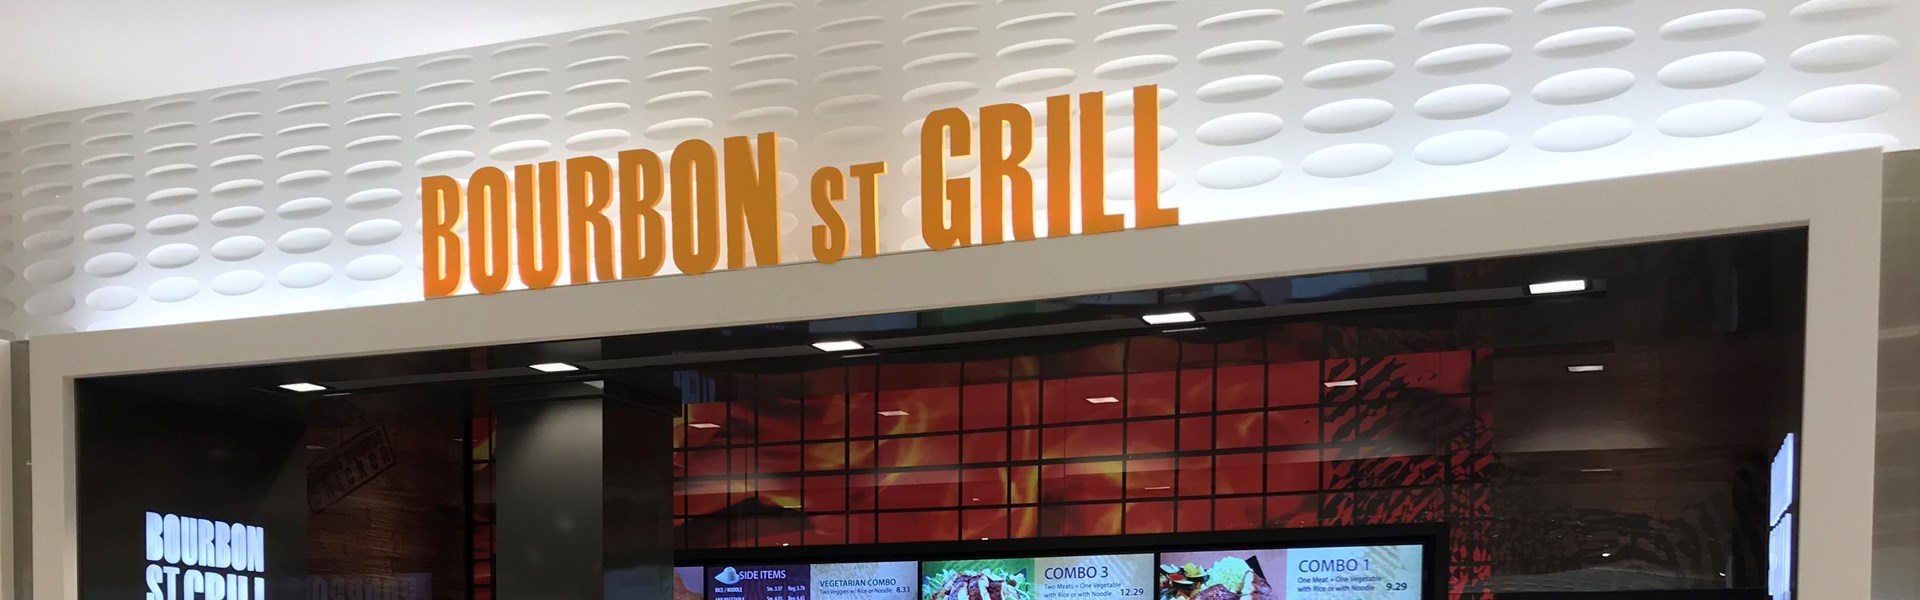 Bourbon St. Grill - Phase III